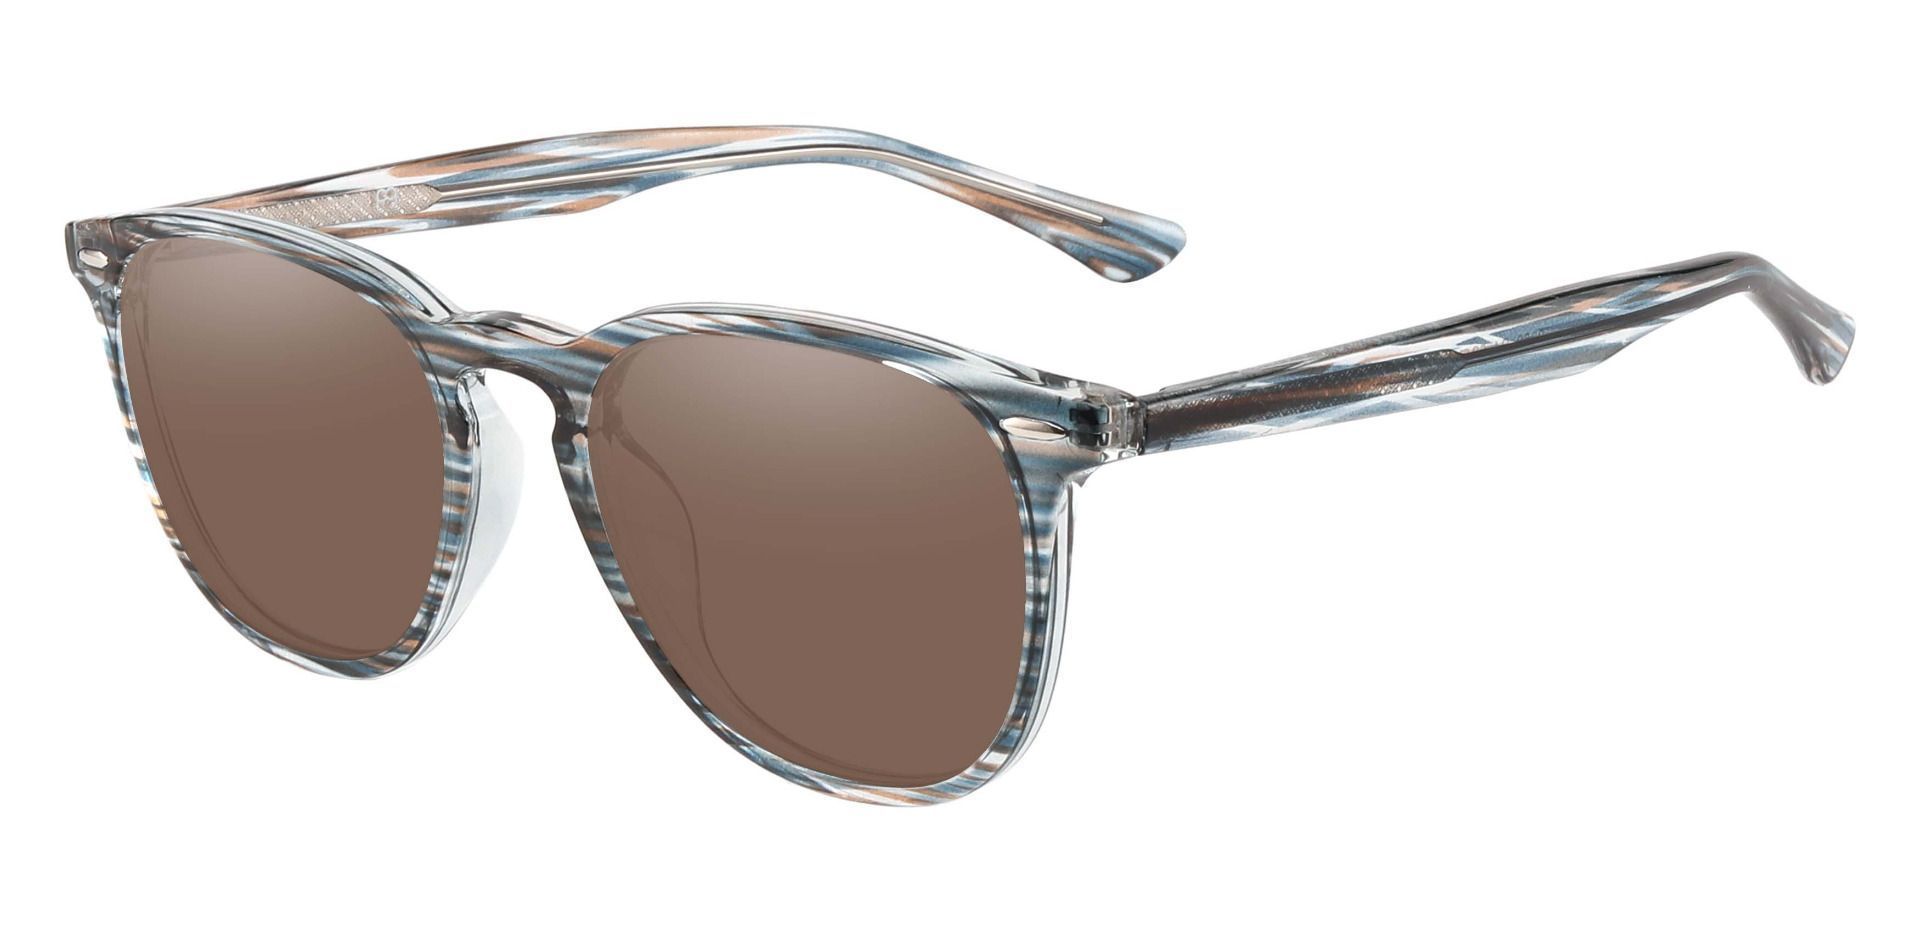 Sycamore Oval Non-Rx Sunglasses - Blue Frame With Brown Lenses